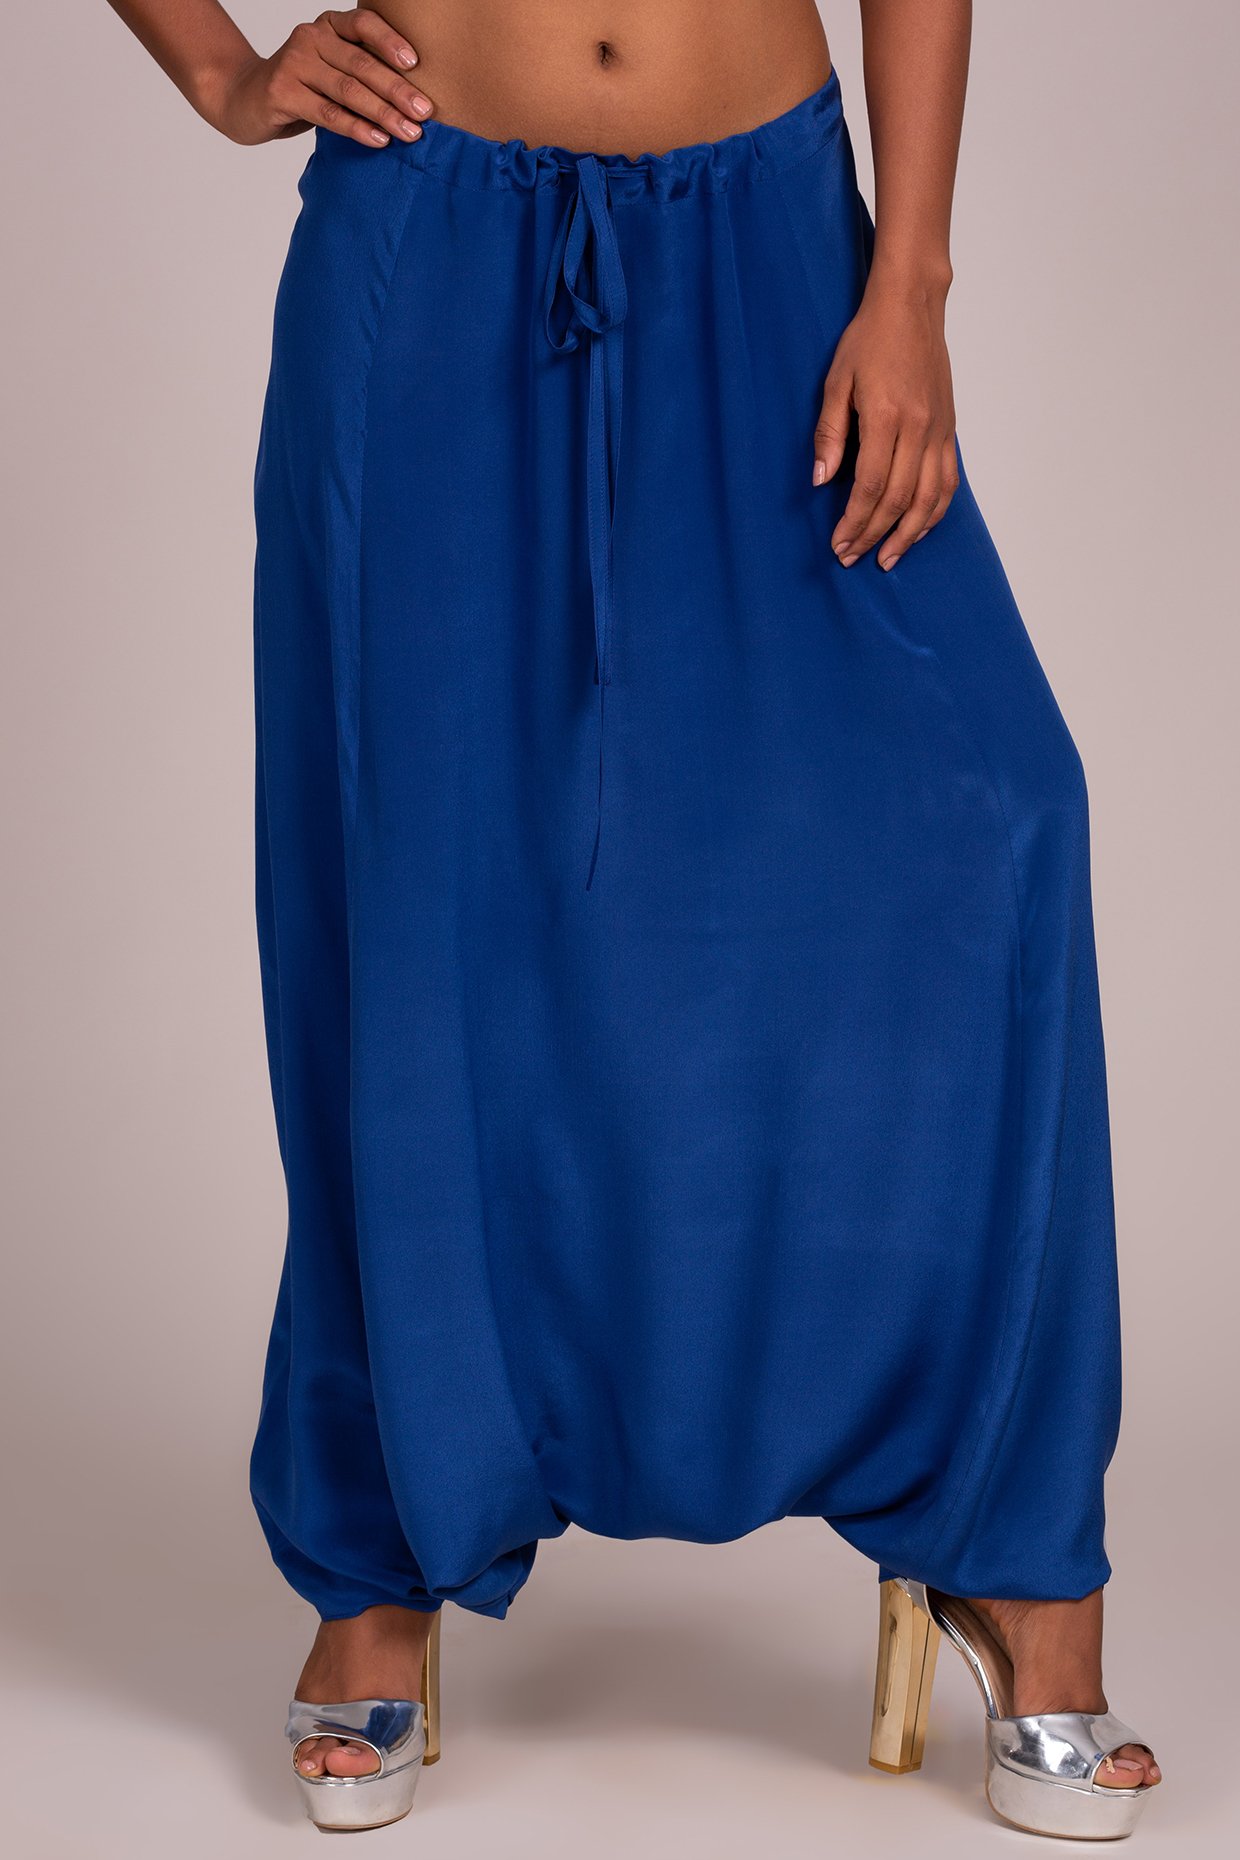 Royal Blue Solid Color Dhoti Harem Pants for Girls  Women  Zubix   Clothing Accessories and Home Furnishing Shop Online